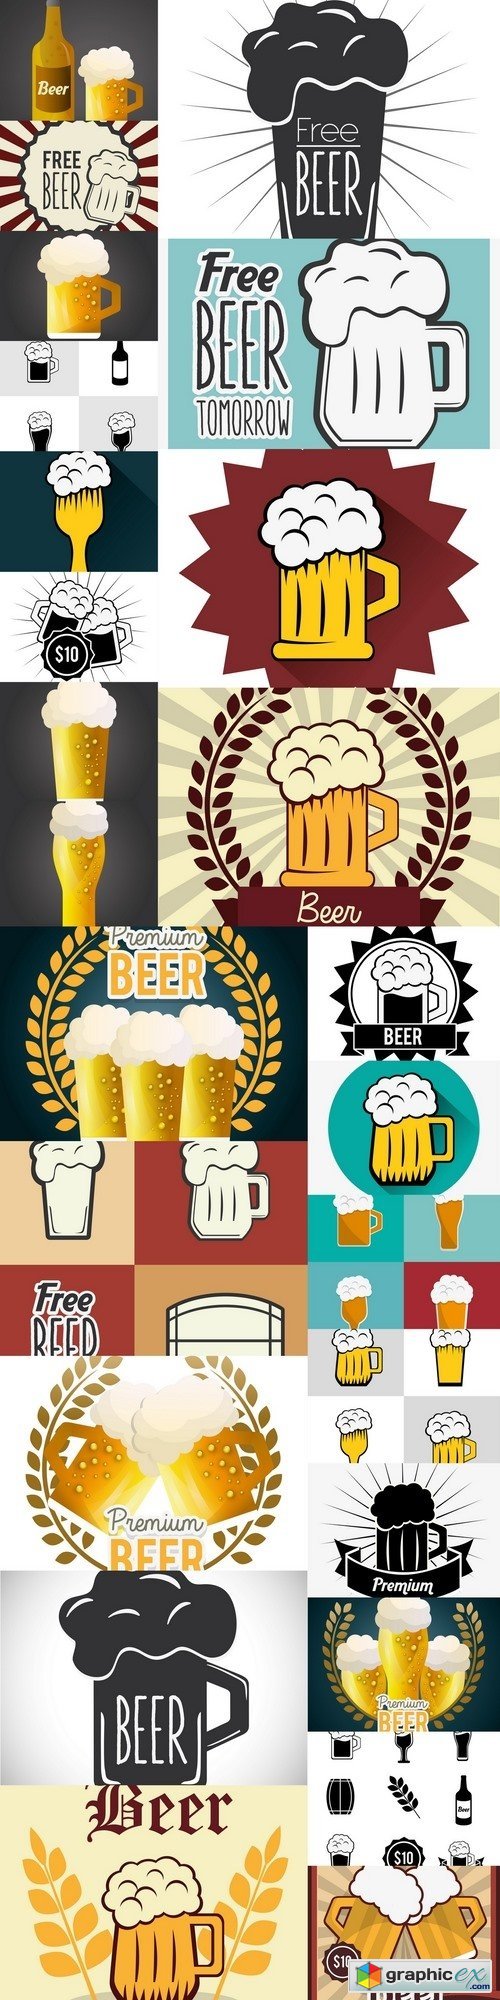 Beer icon design 2